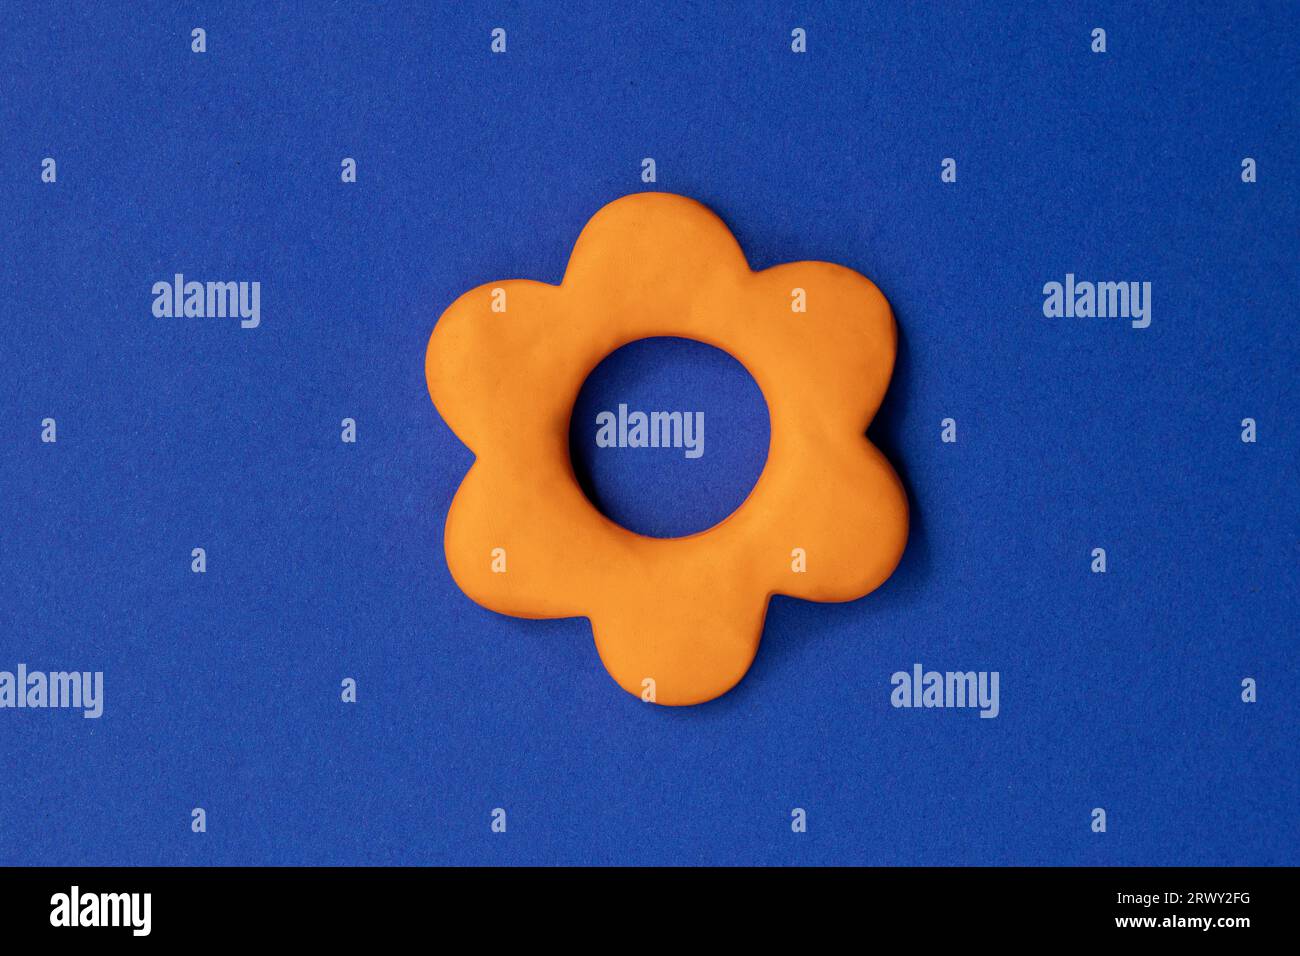 Simple three dimensional sign of flower. Symbol of prosperity, growth concept, growing buissnes. Orange flower icon on blue background, environmental, Stock Photo